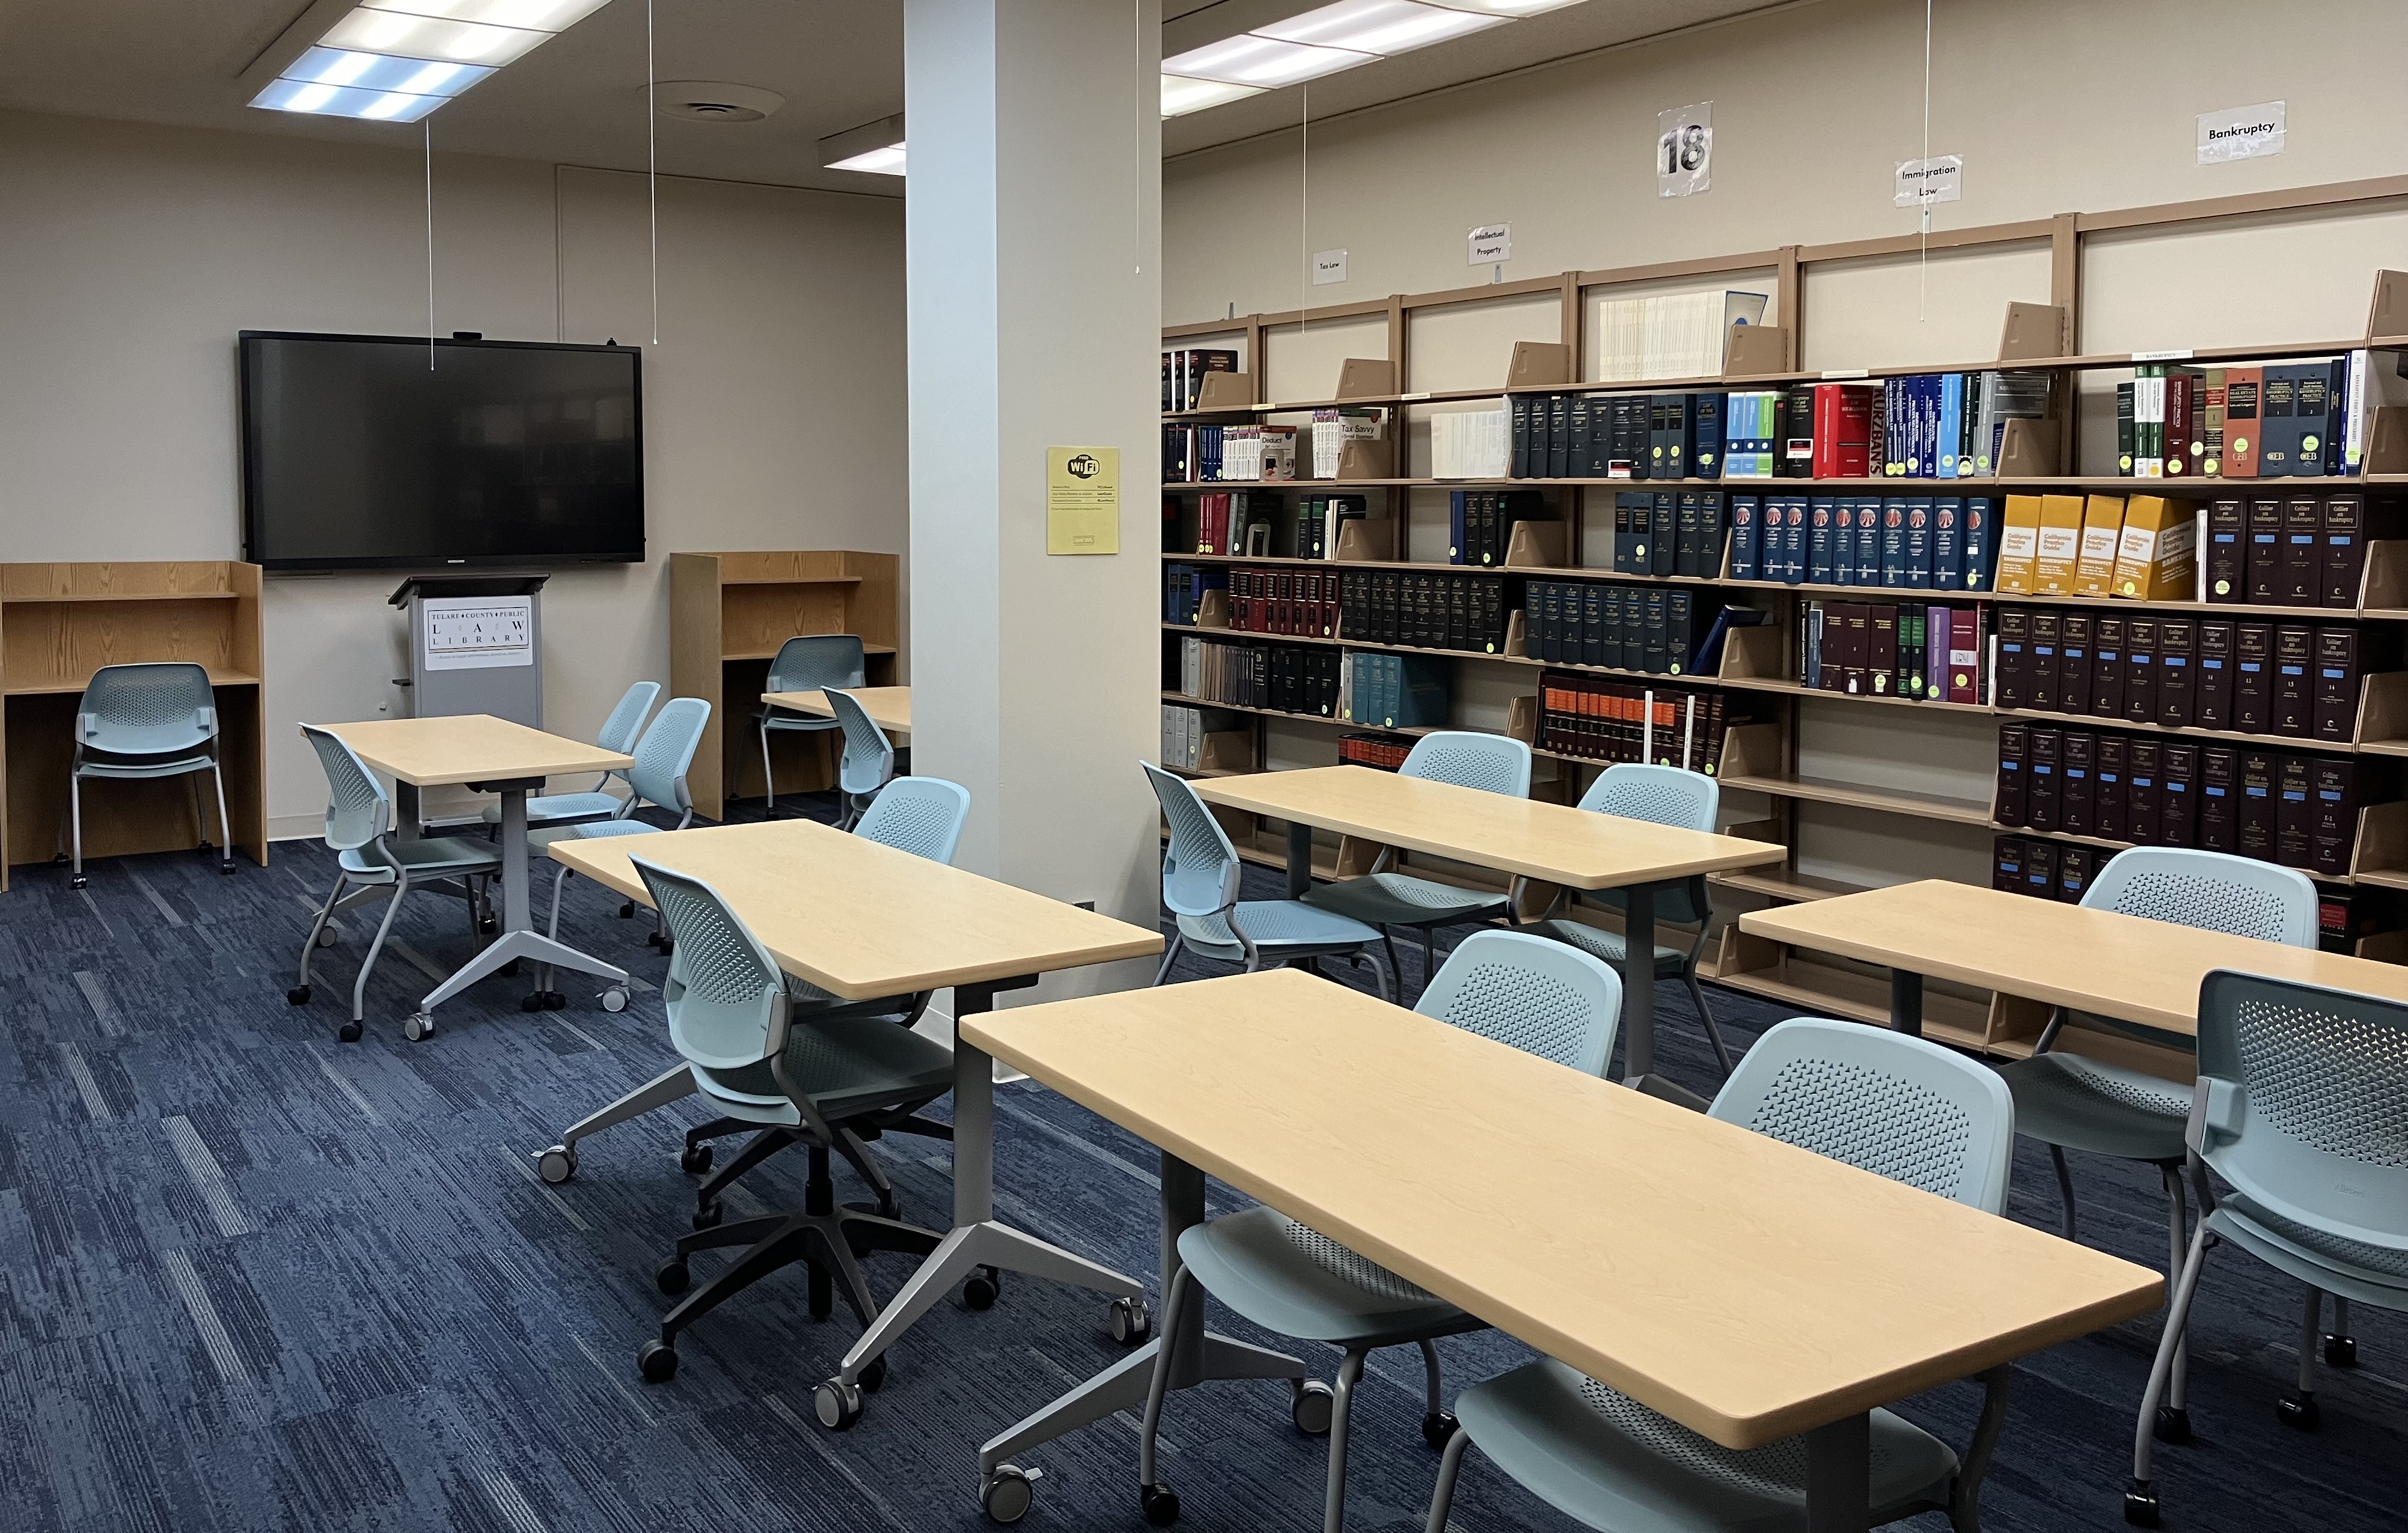 Picture of law library work space with tables and chairs.